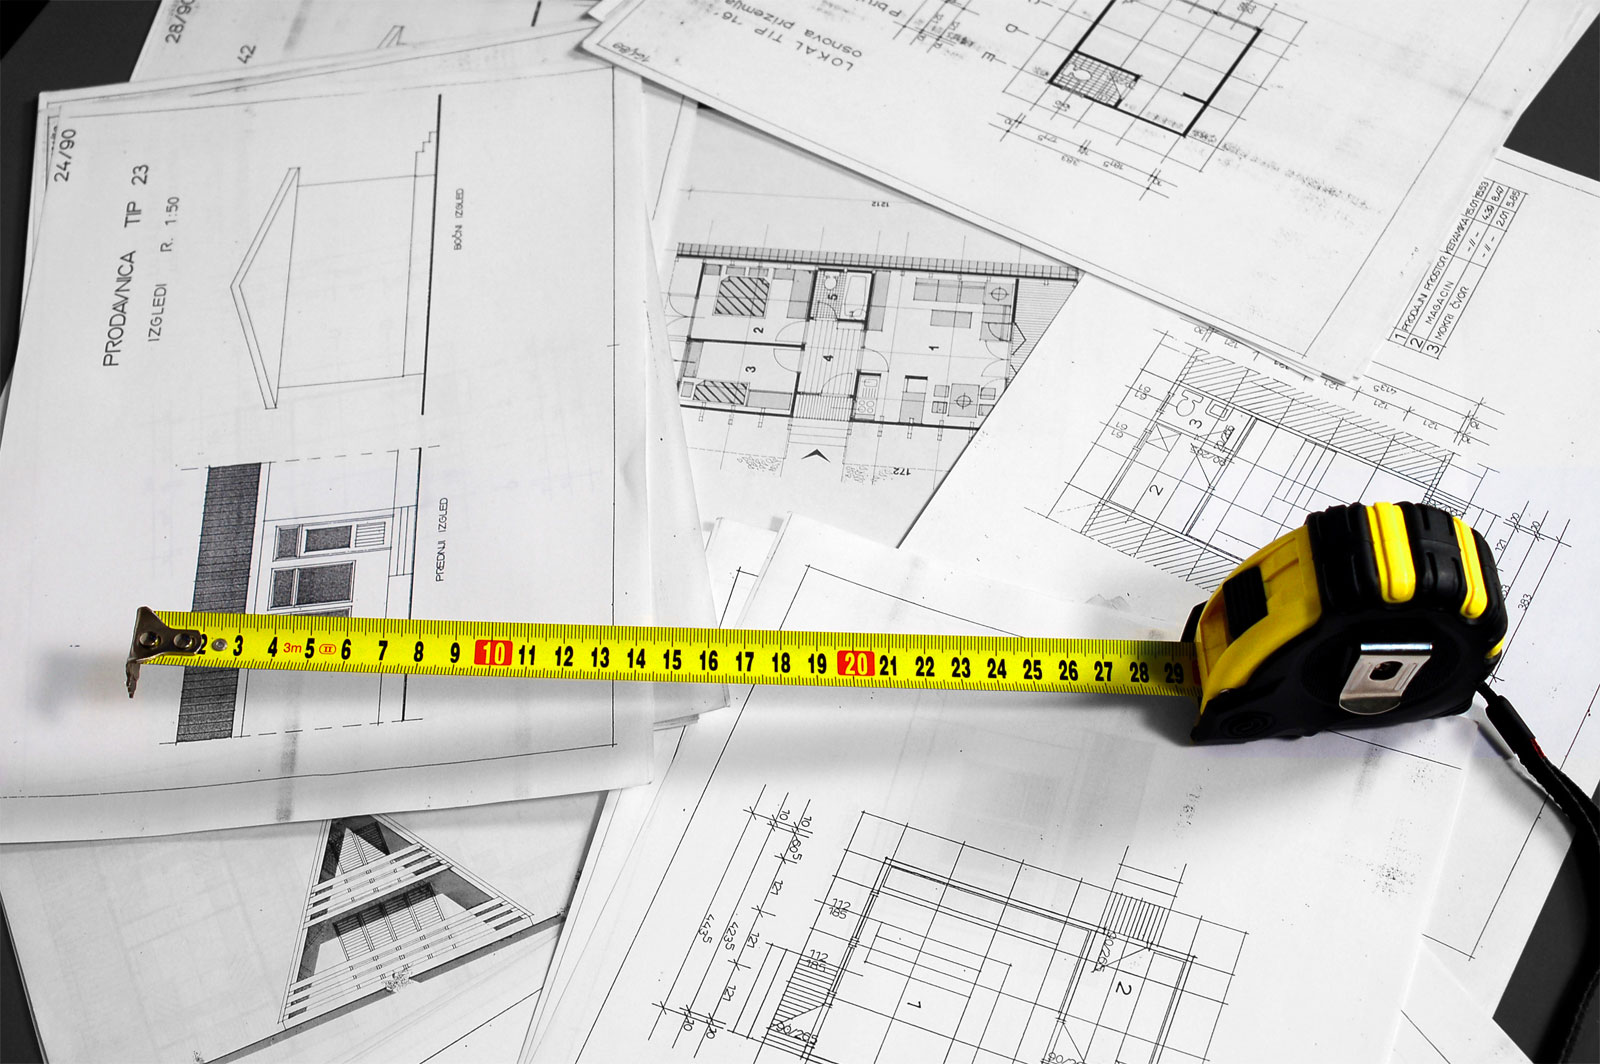 Get The Party Wall Surveys Done With The Right Experts